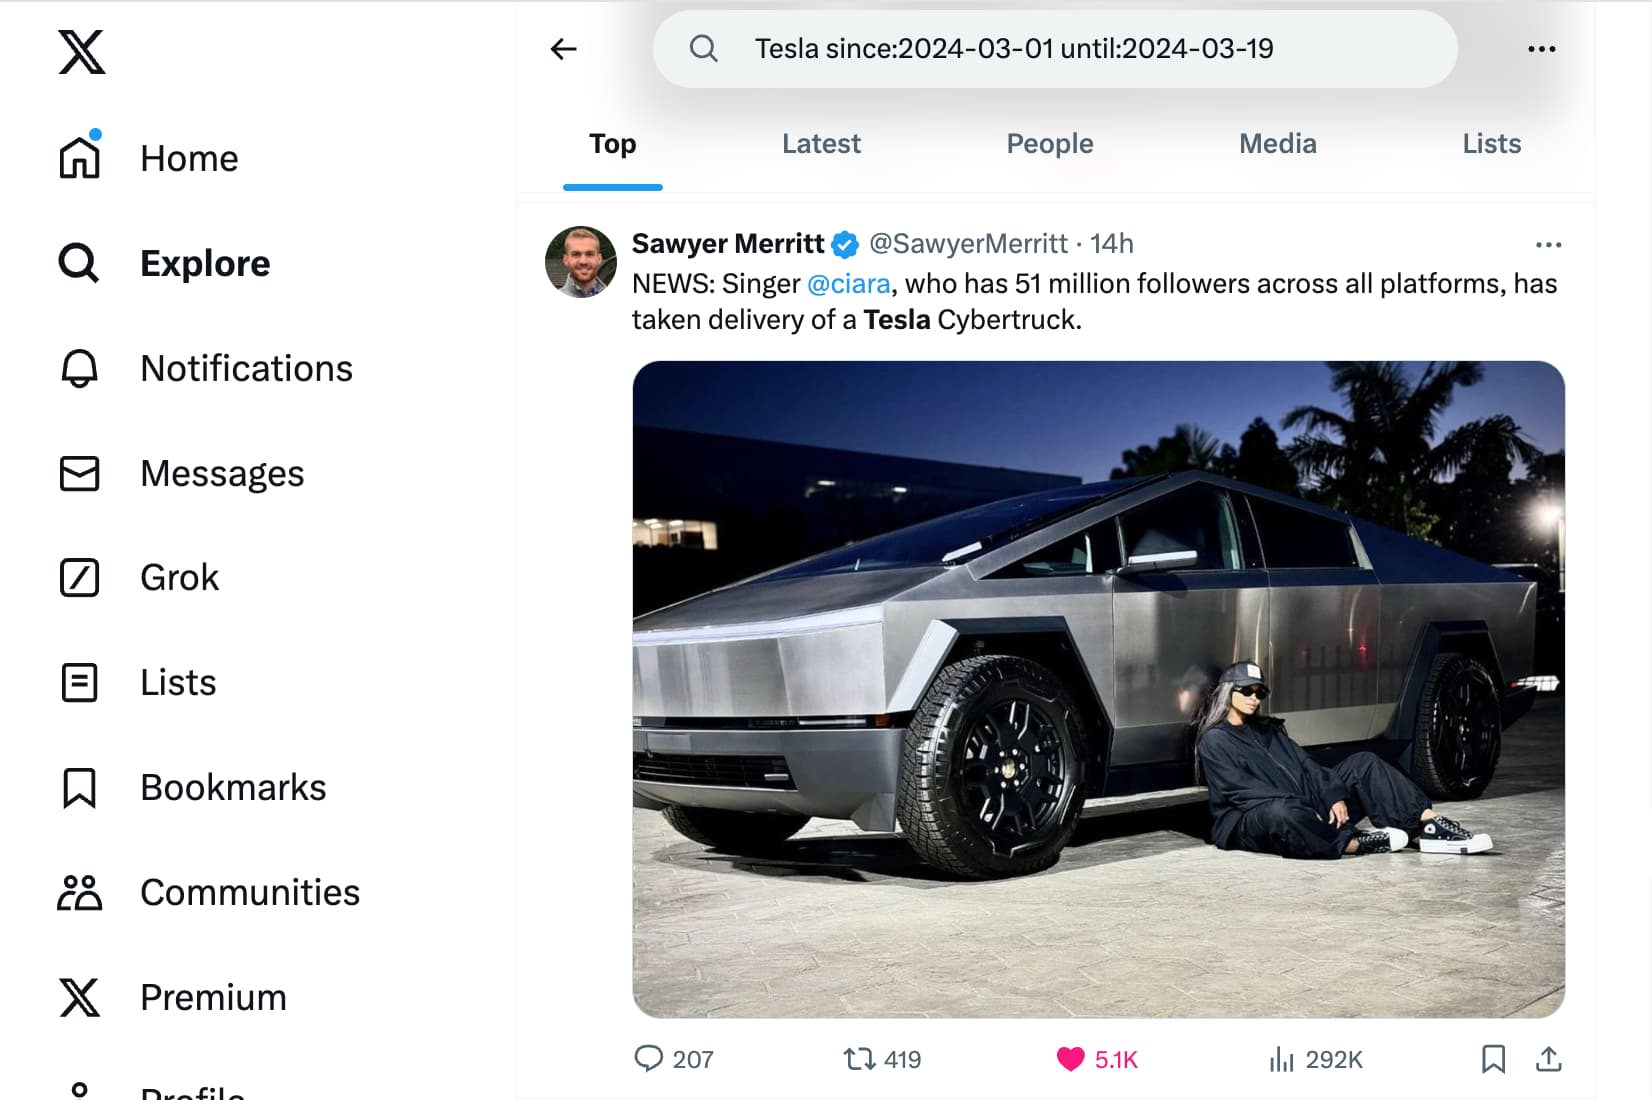 Finding Tesla tweets for specific dates